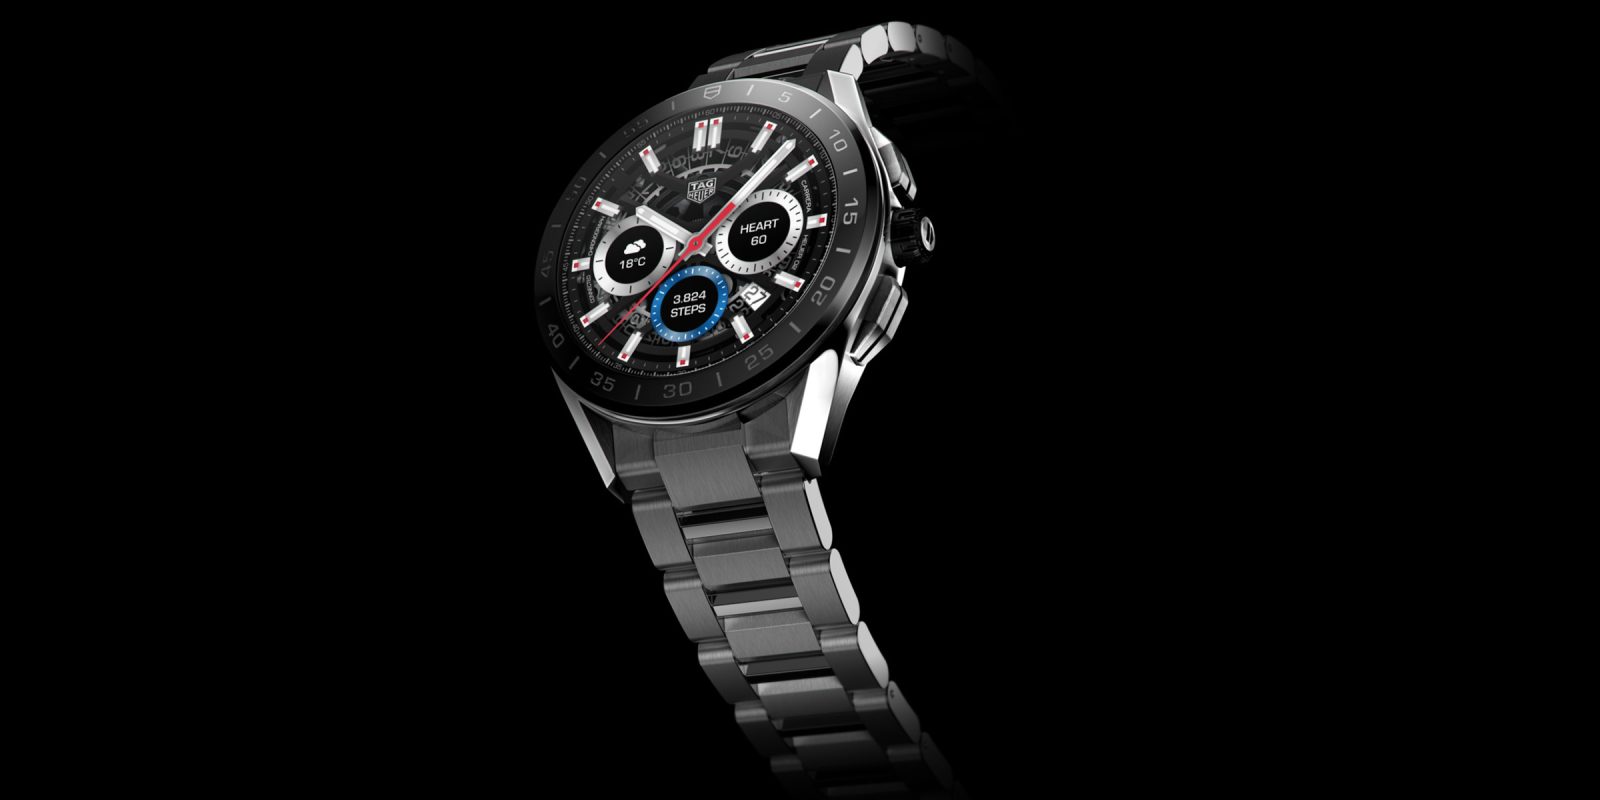 tag heuer connected 2020 wear os smartwatch